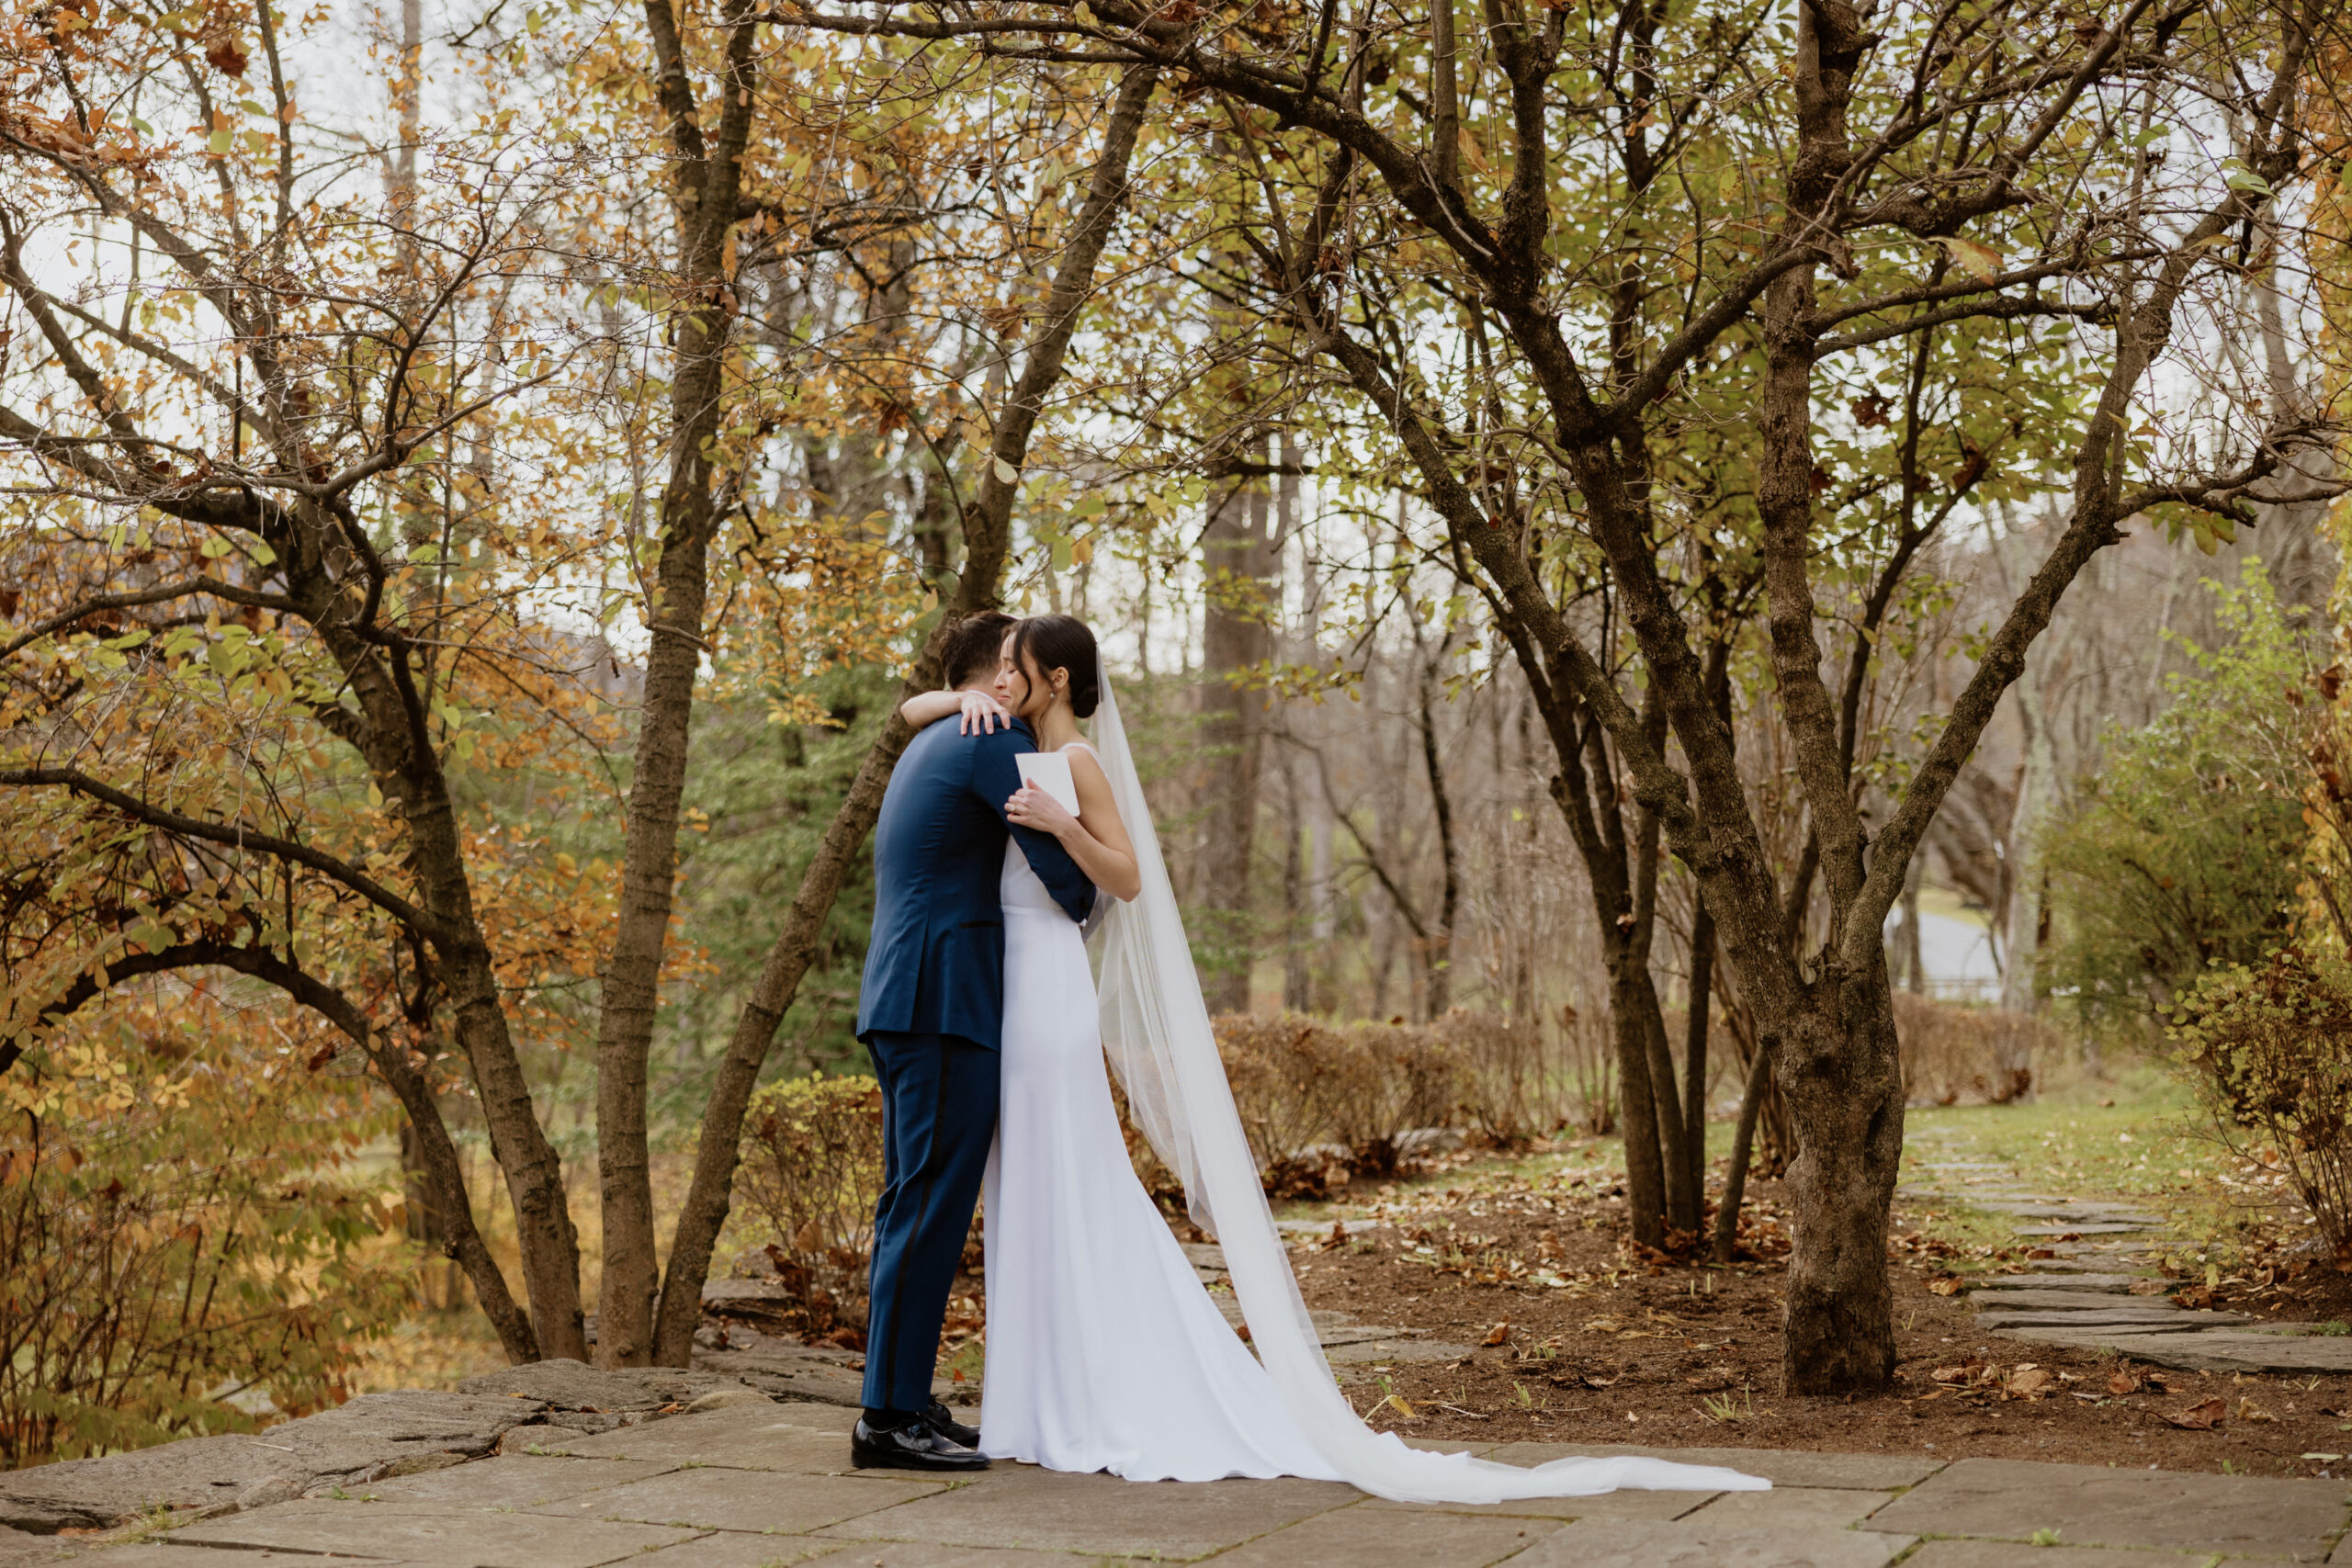 First look photo of the bride and groom at Troutbeck, New York. Image by Jenny Fu Studio